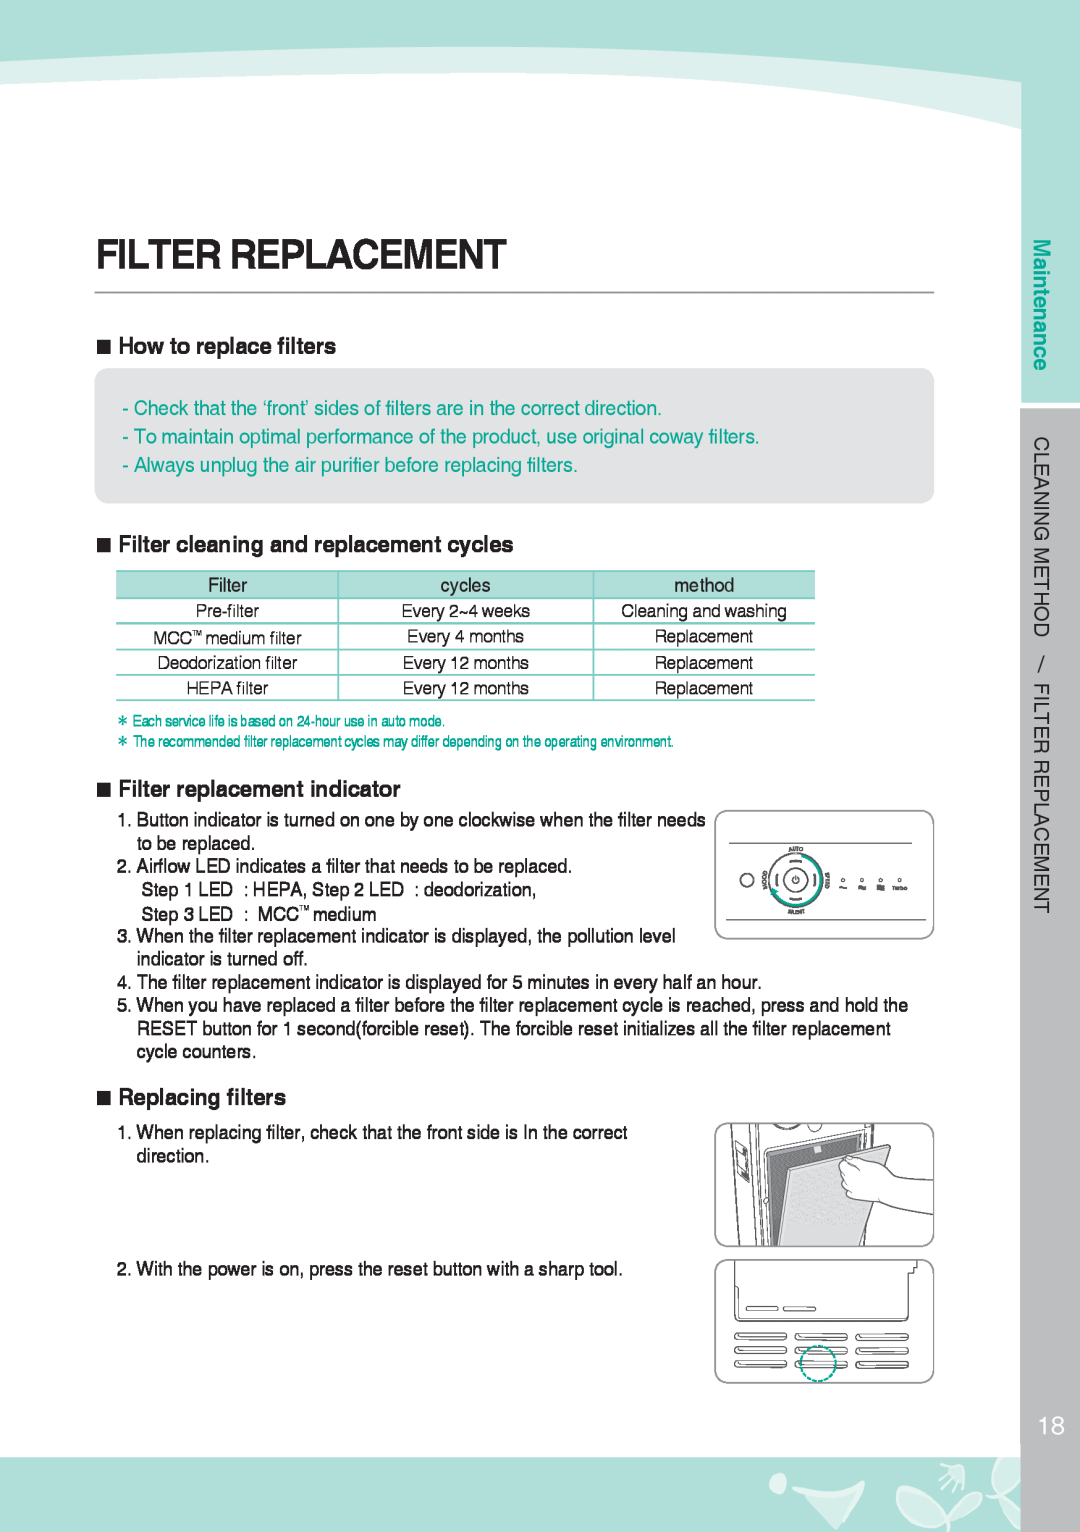 NewAir AP-1008DH Filter Replacement, How to replace filters, Filter cleaning and replacement cycles, Replacing filters 